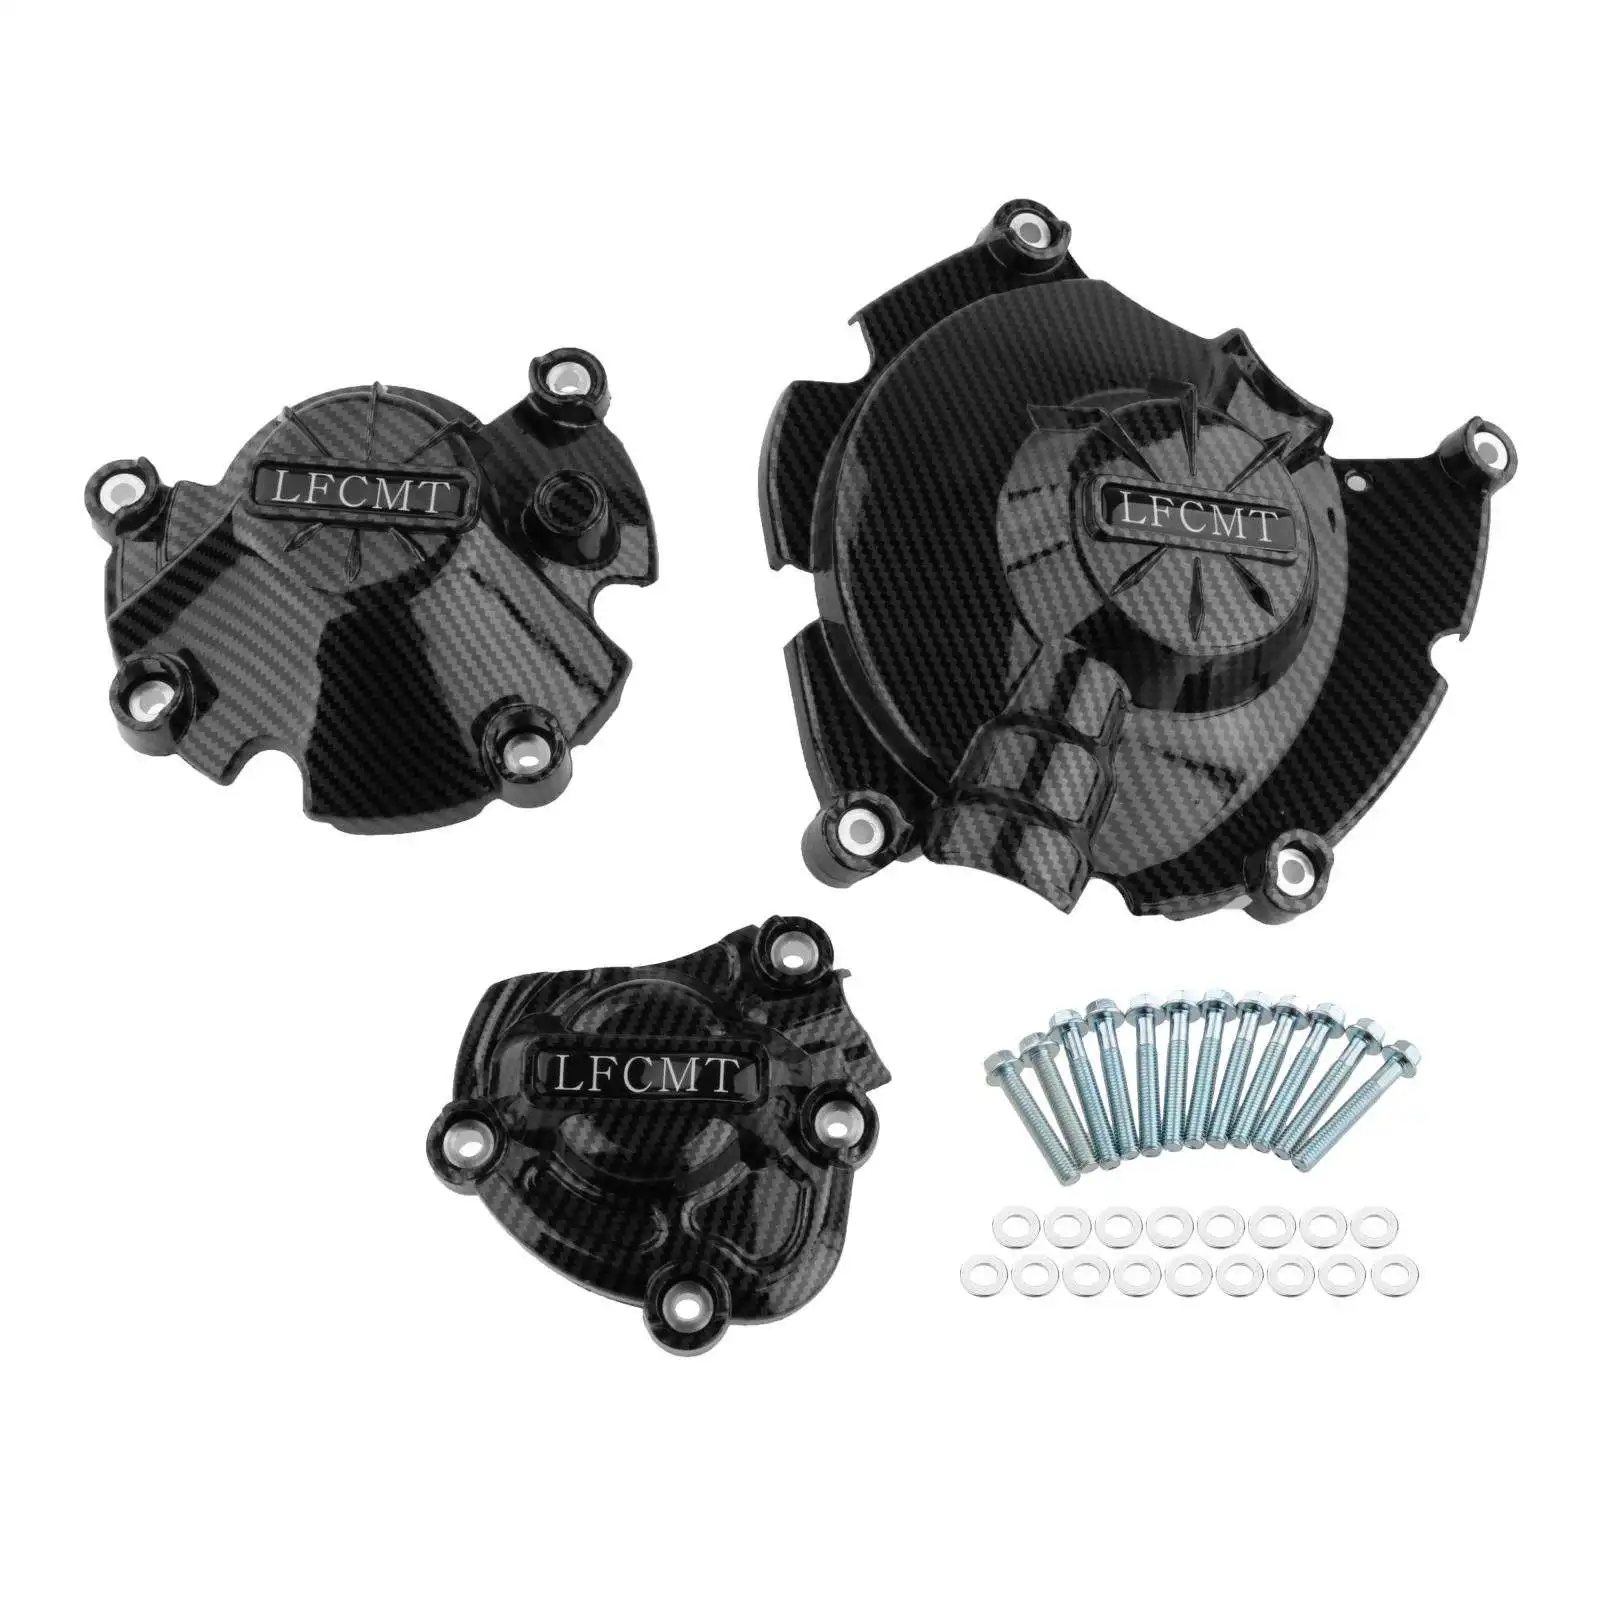 Motorcycles Engine Cover for Yamaha Mt-10 2015-2021 Replaces Easy to Install Premium Professional